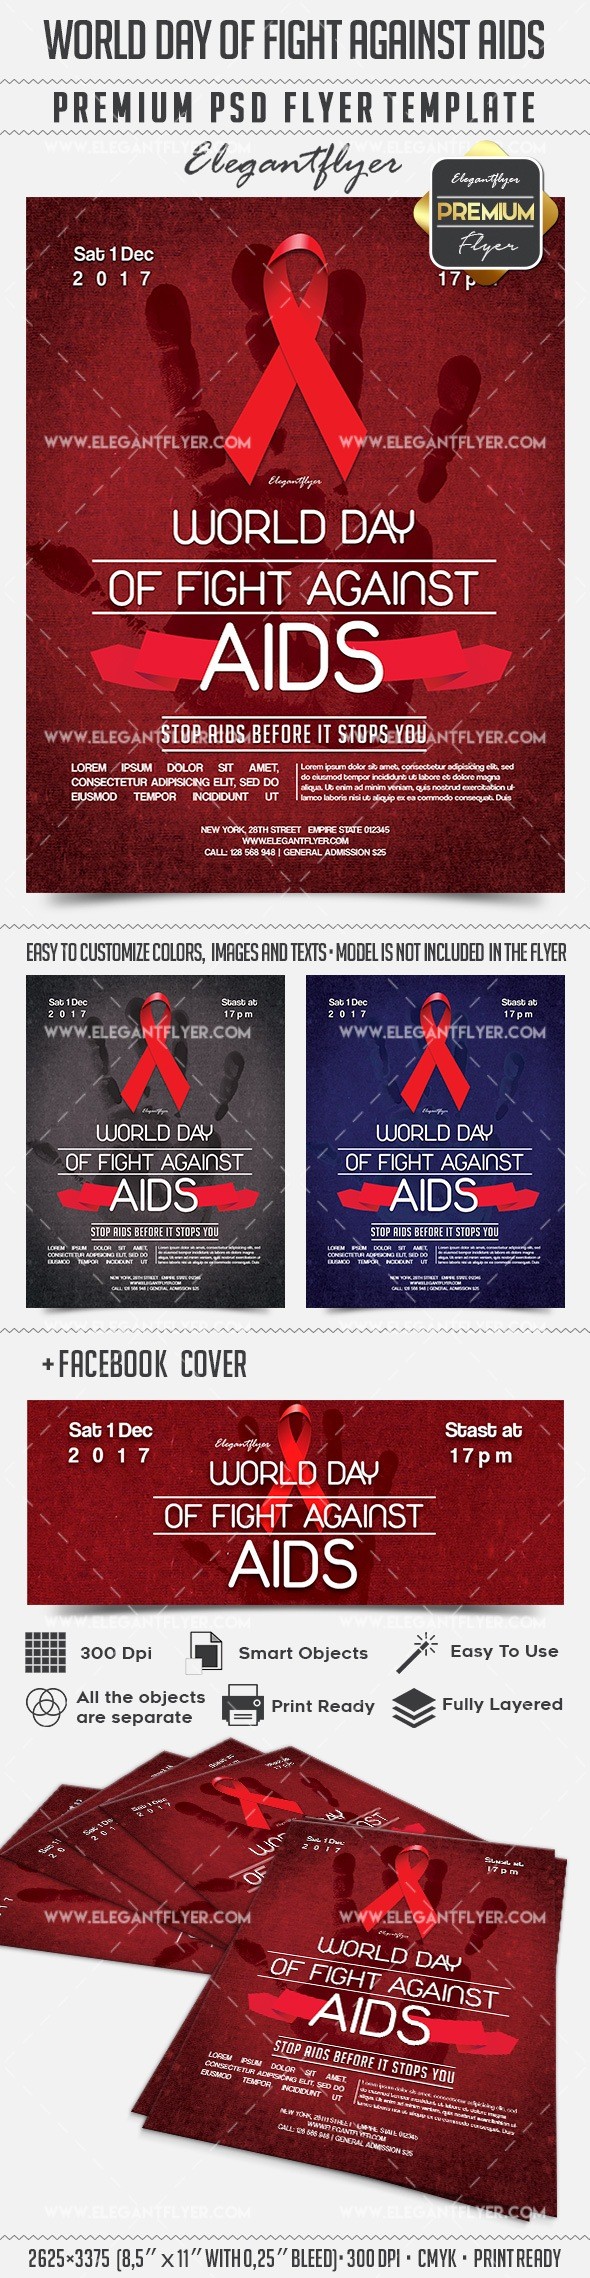 World day of fight against AIDS by ElegantFlyer